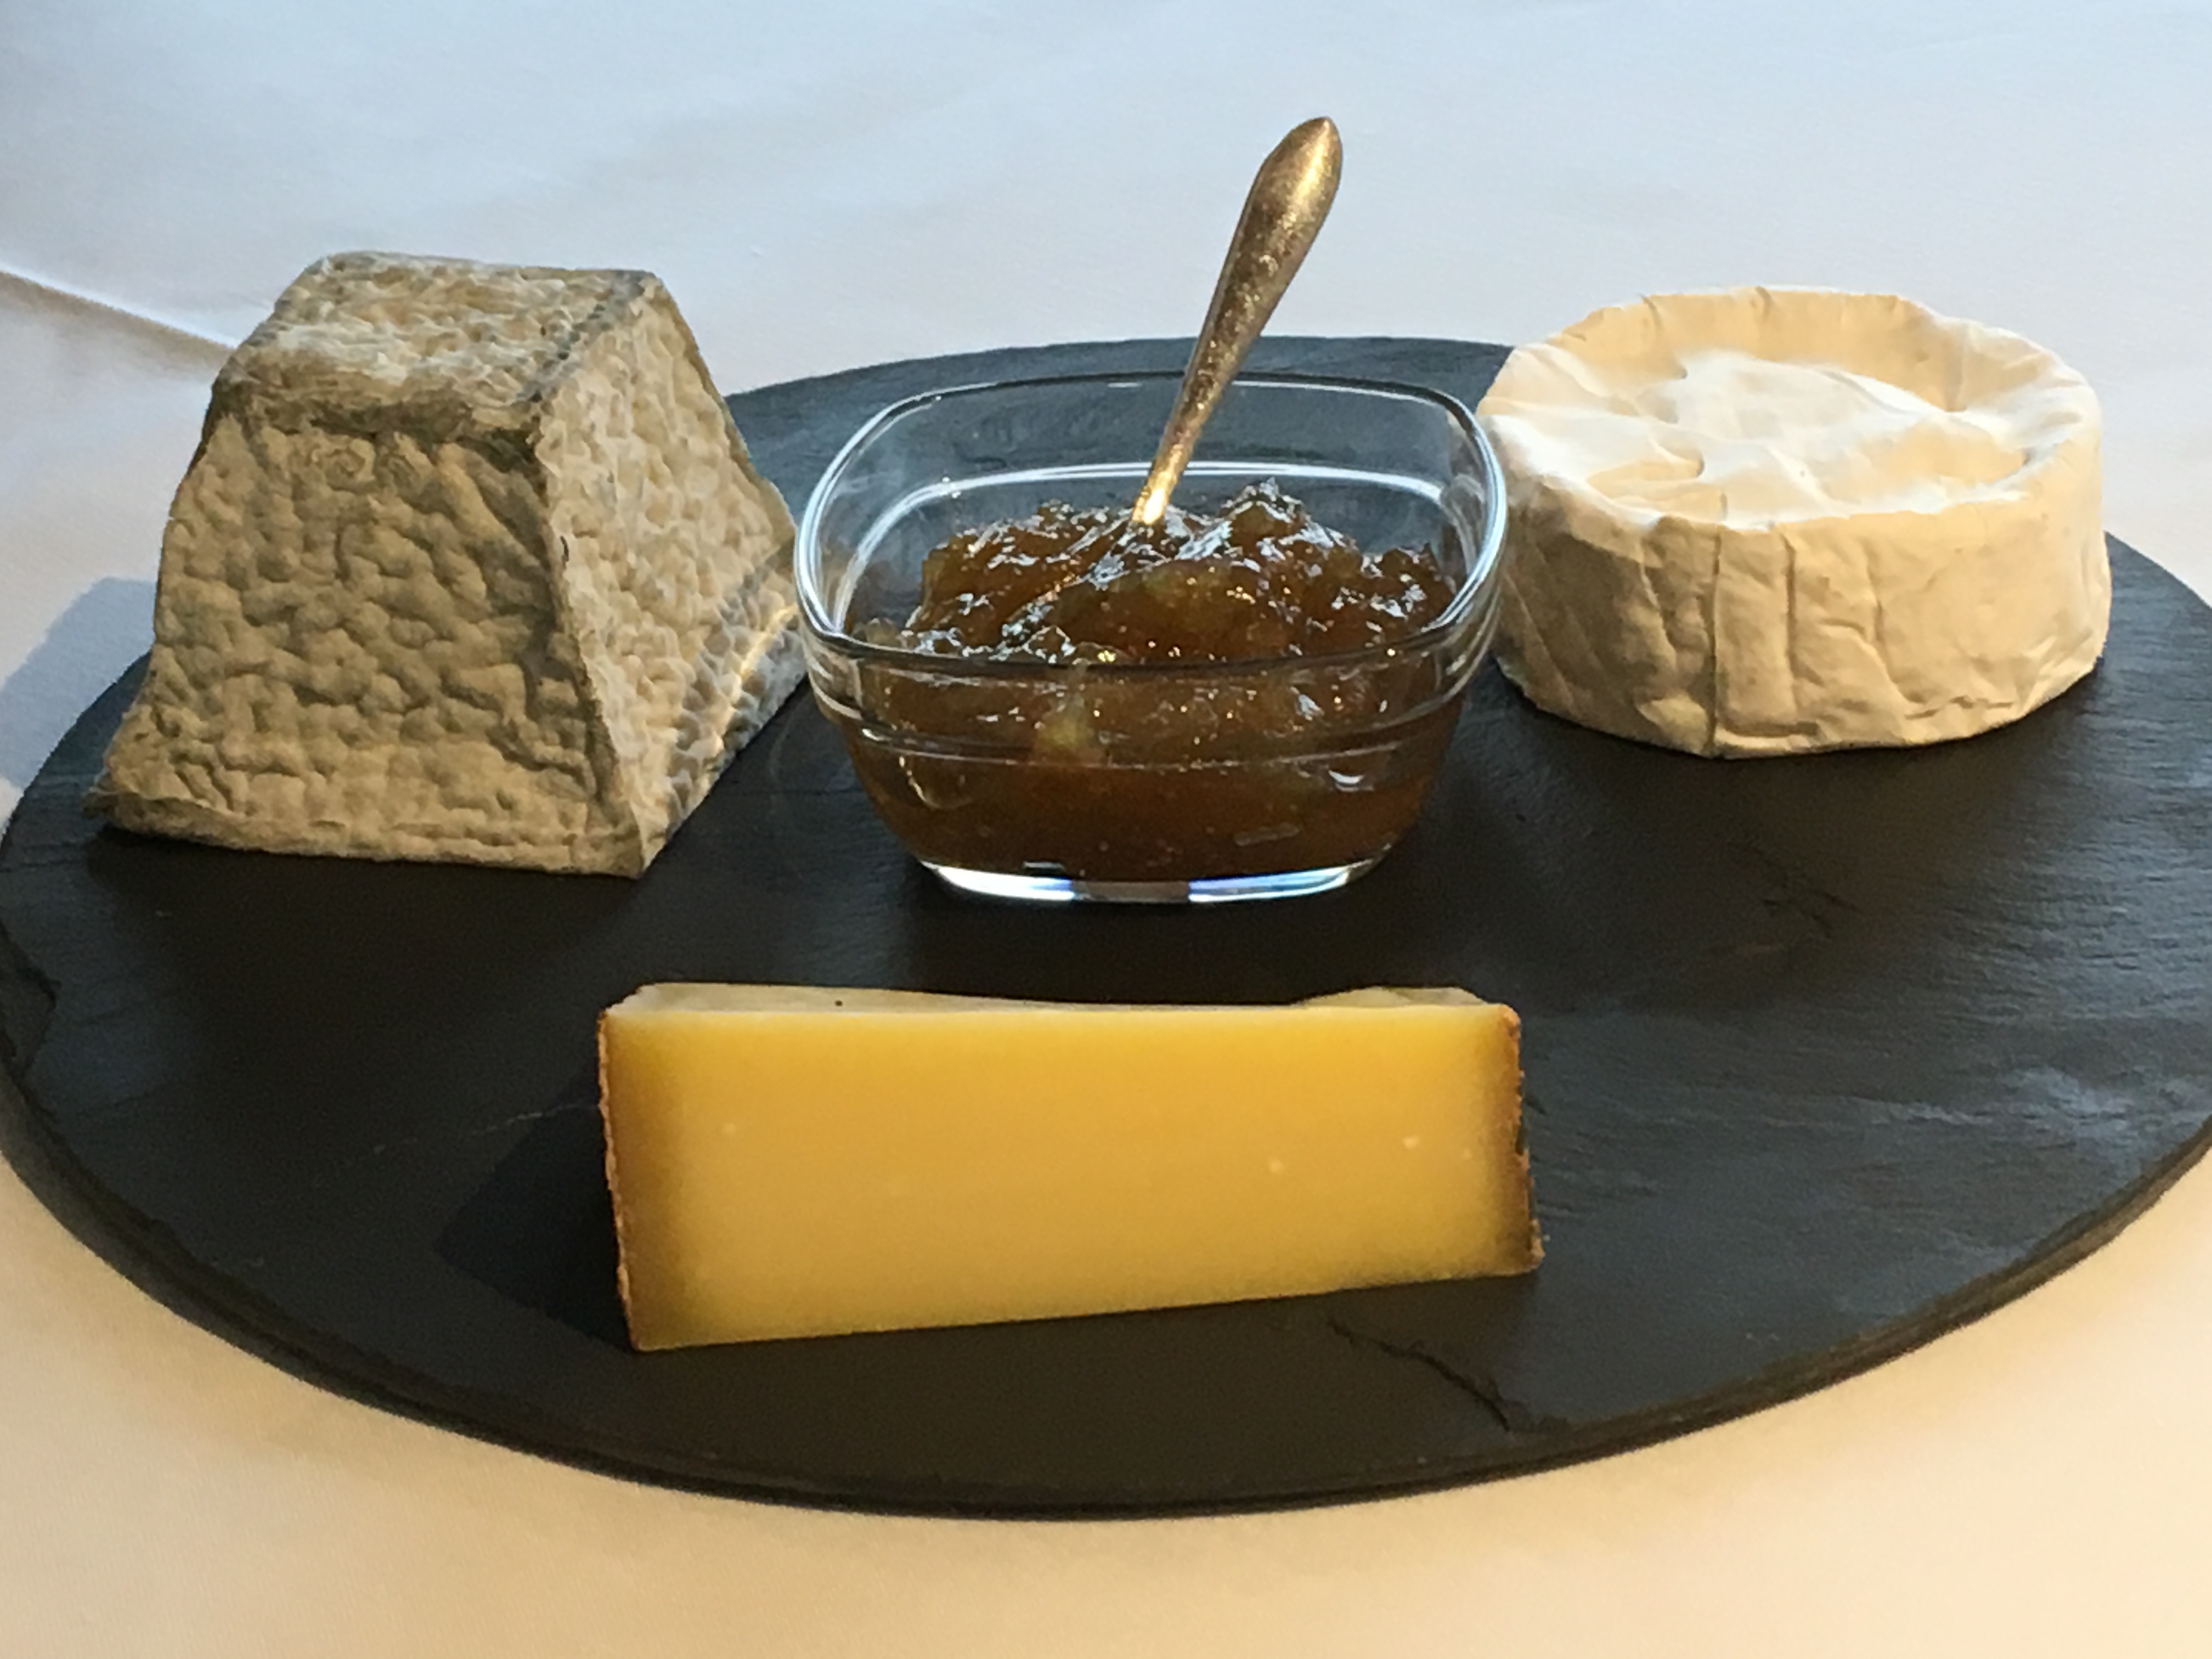 Panache Cheese Presentation - Finding Balance on a Barge in France